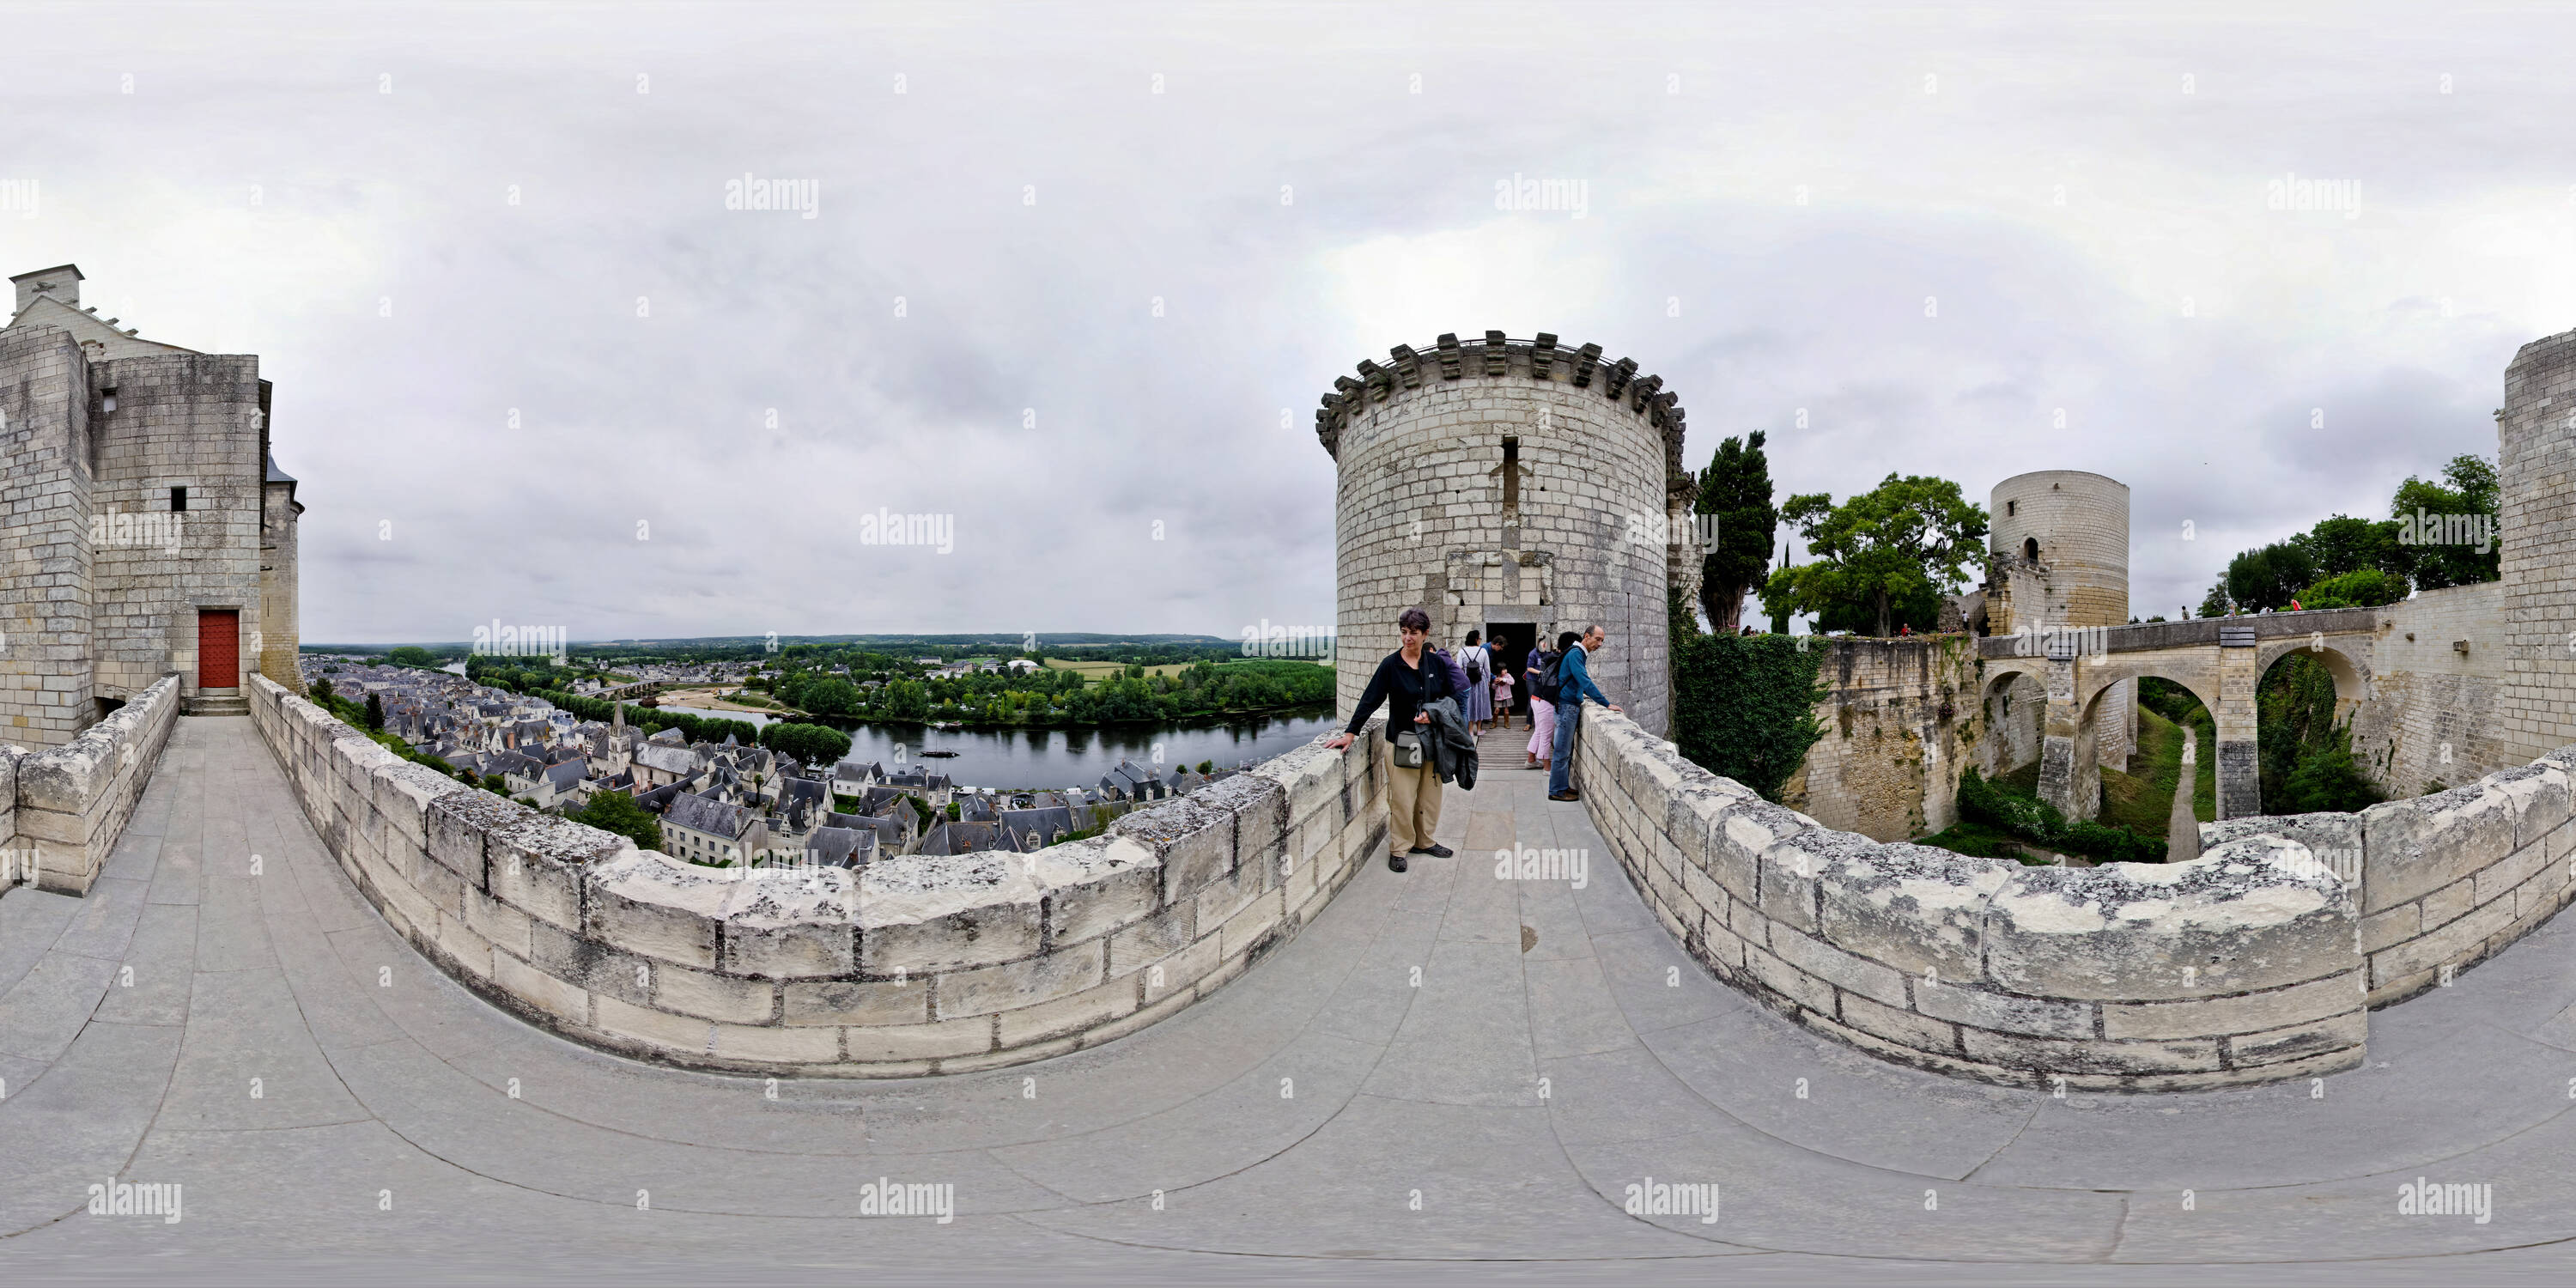 360 degree panoramic view of River Vienne, Chateau de Chinon, France